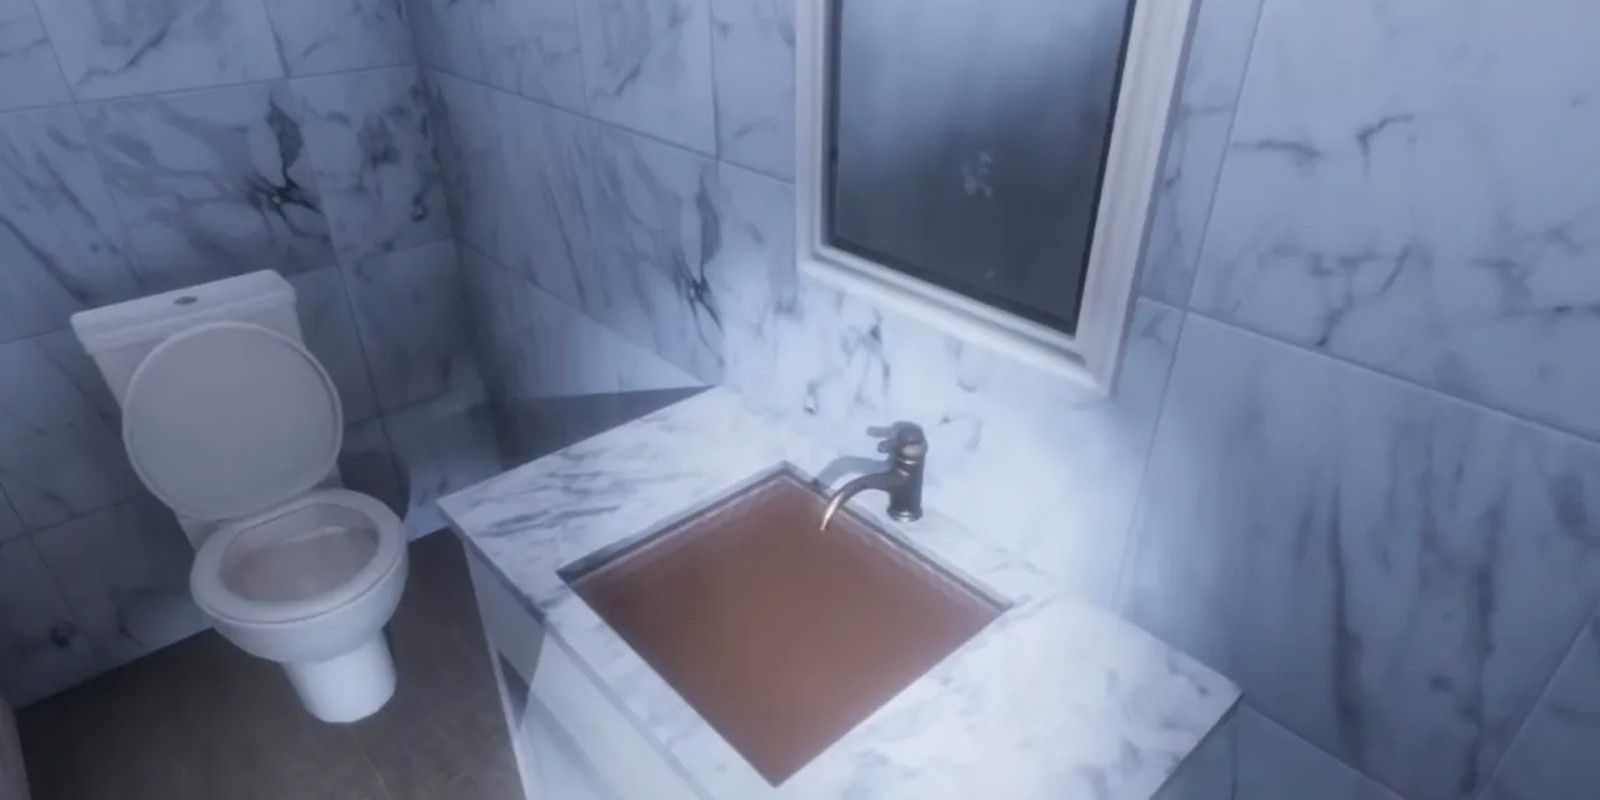 A player takes a picture of a sink full of dirty water in Phasmophobia